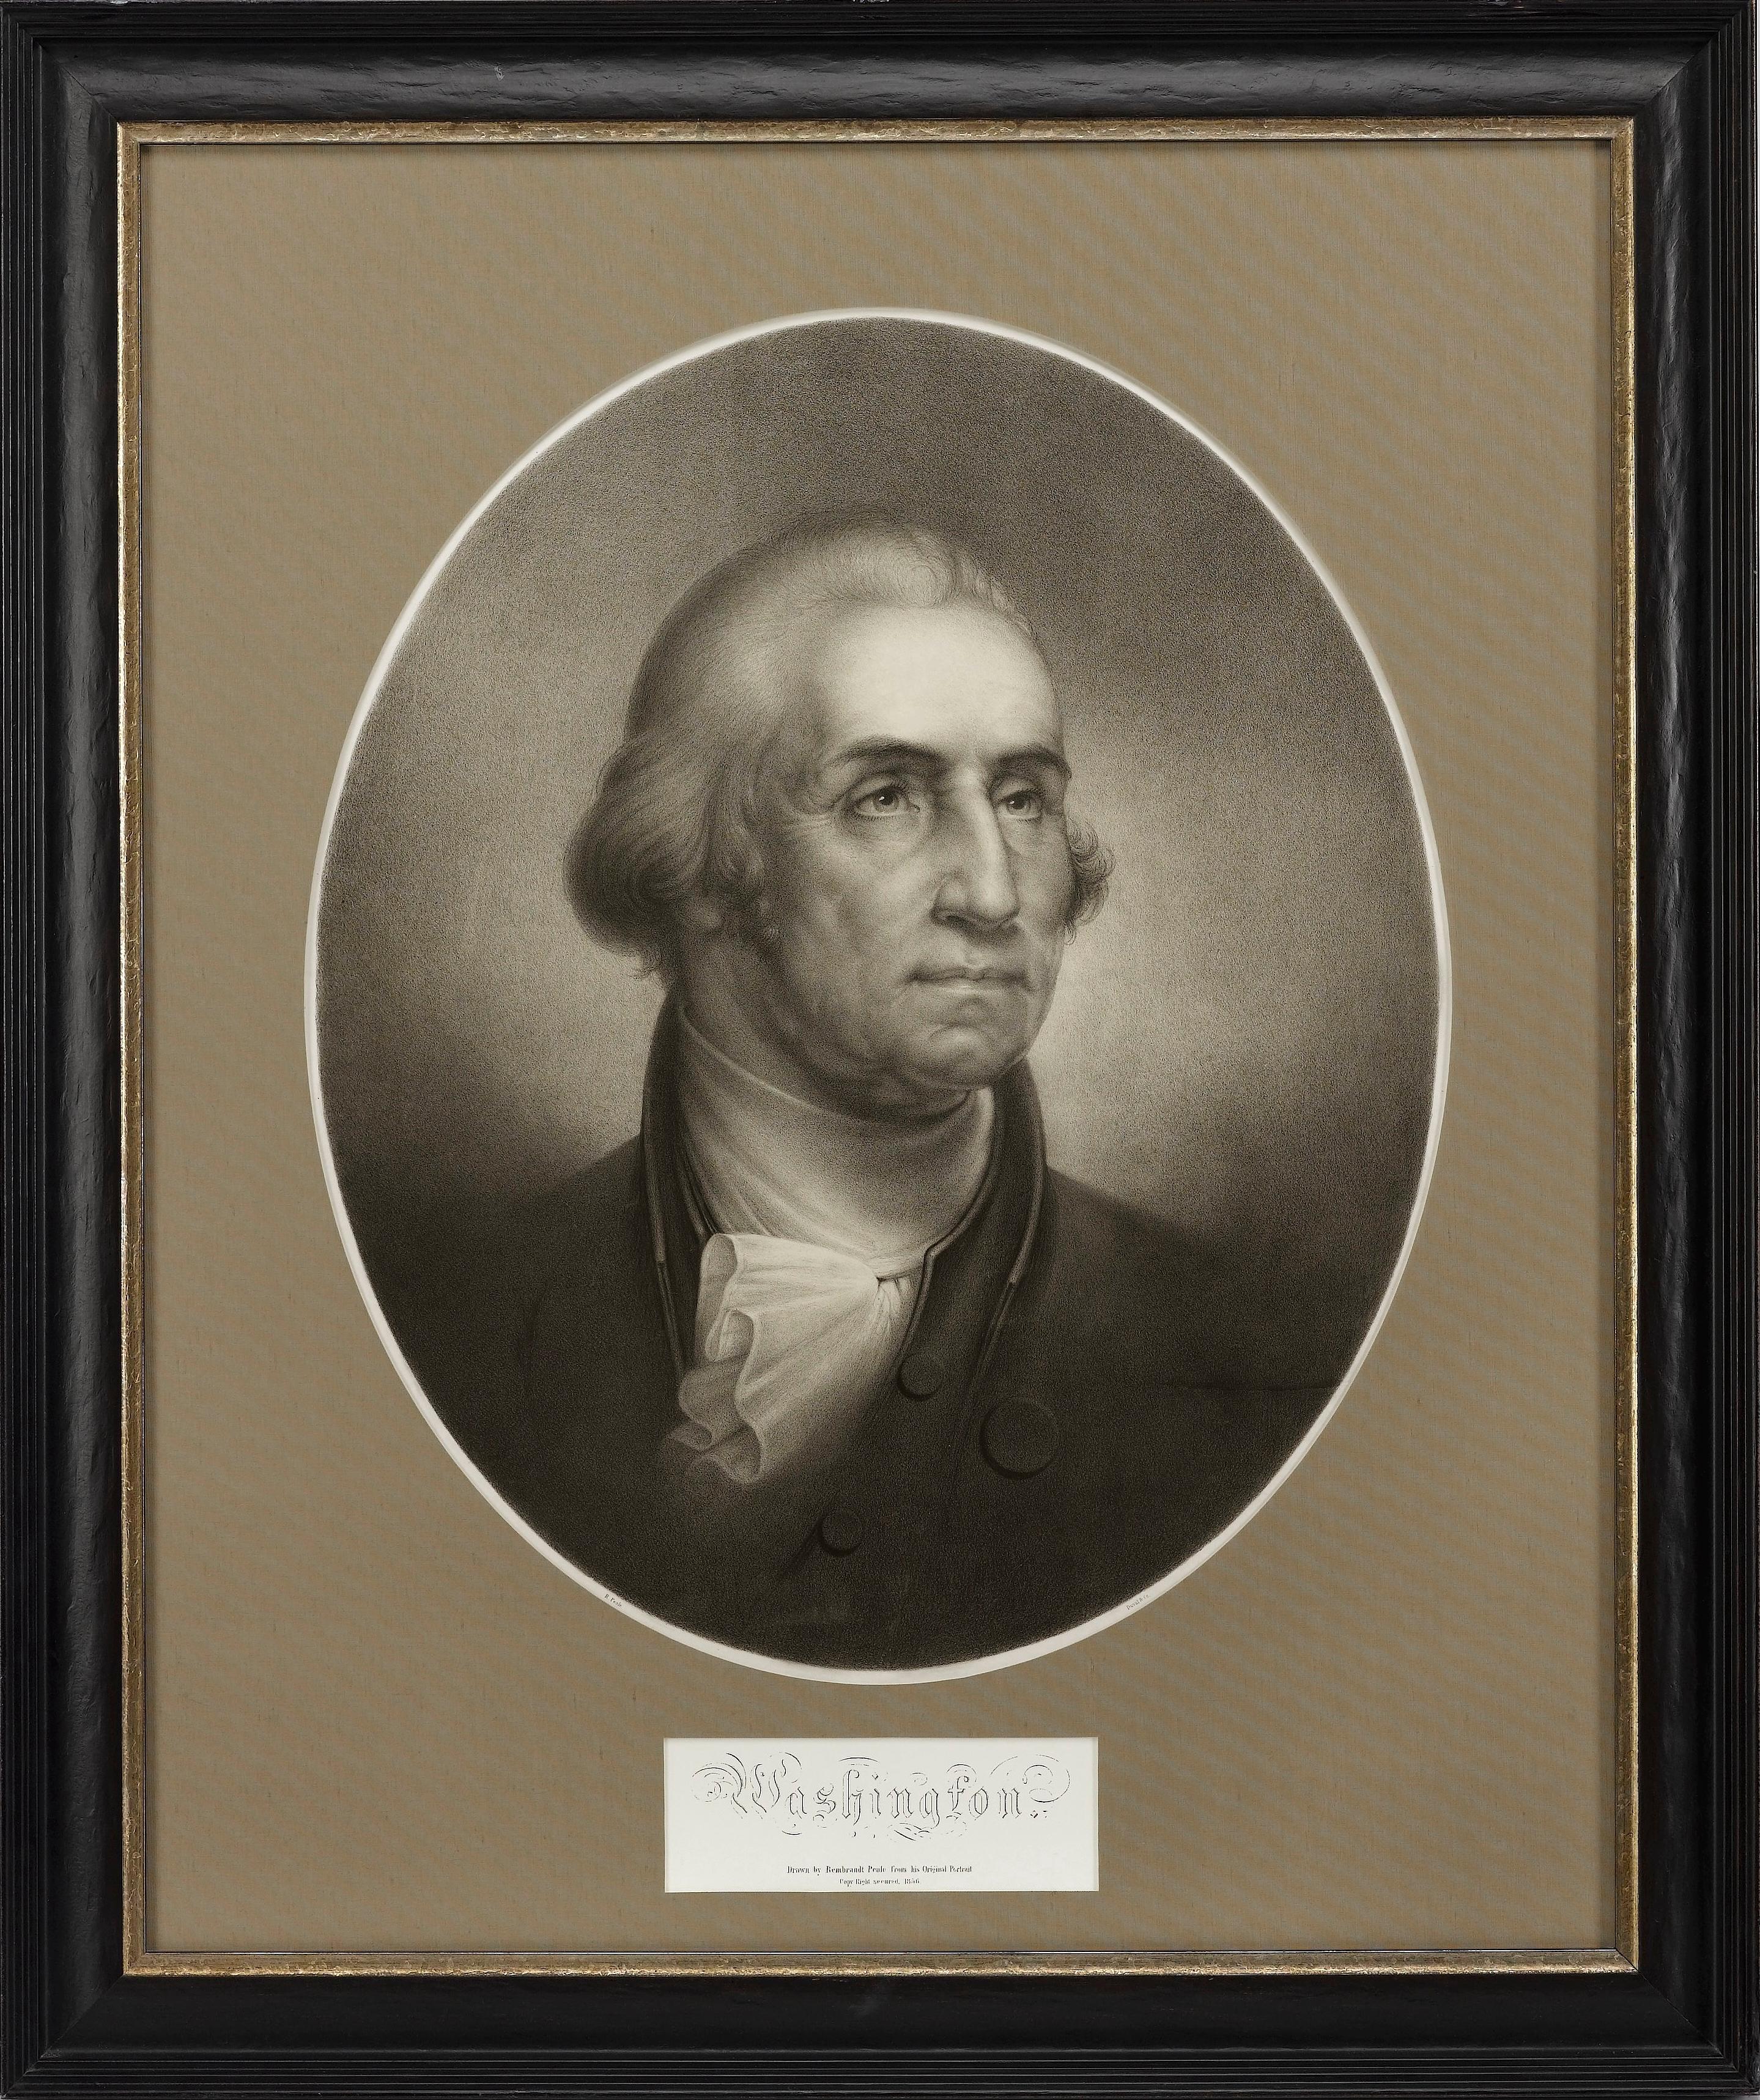 Presented is an original lithograph of George Washington, shown in three-quarter pose with formal dress. Printed in oval form, the black and white lithograph was printed by Peter S. Duval Co. of Philadelphia in 1856. The portrait is modeled after a